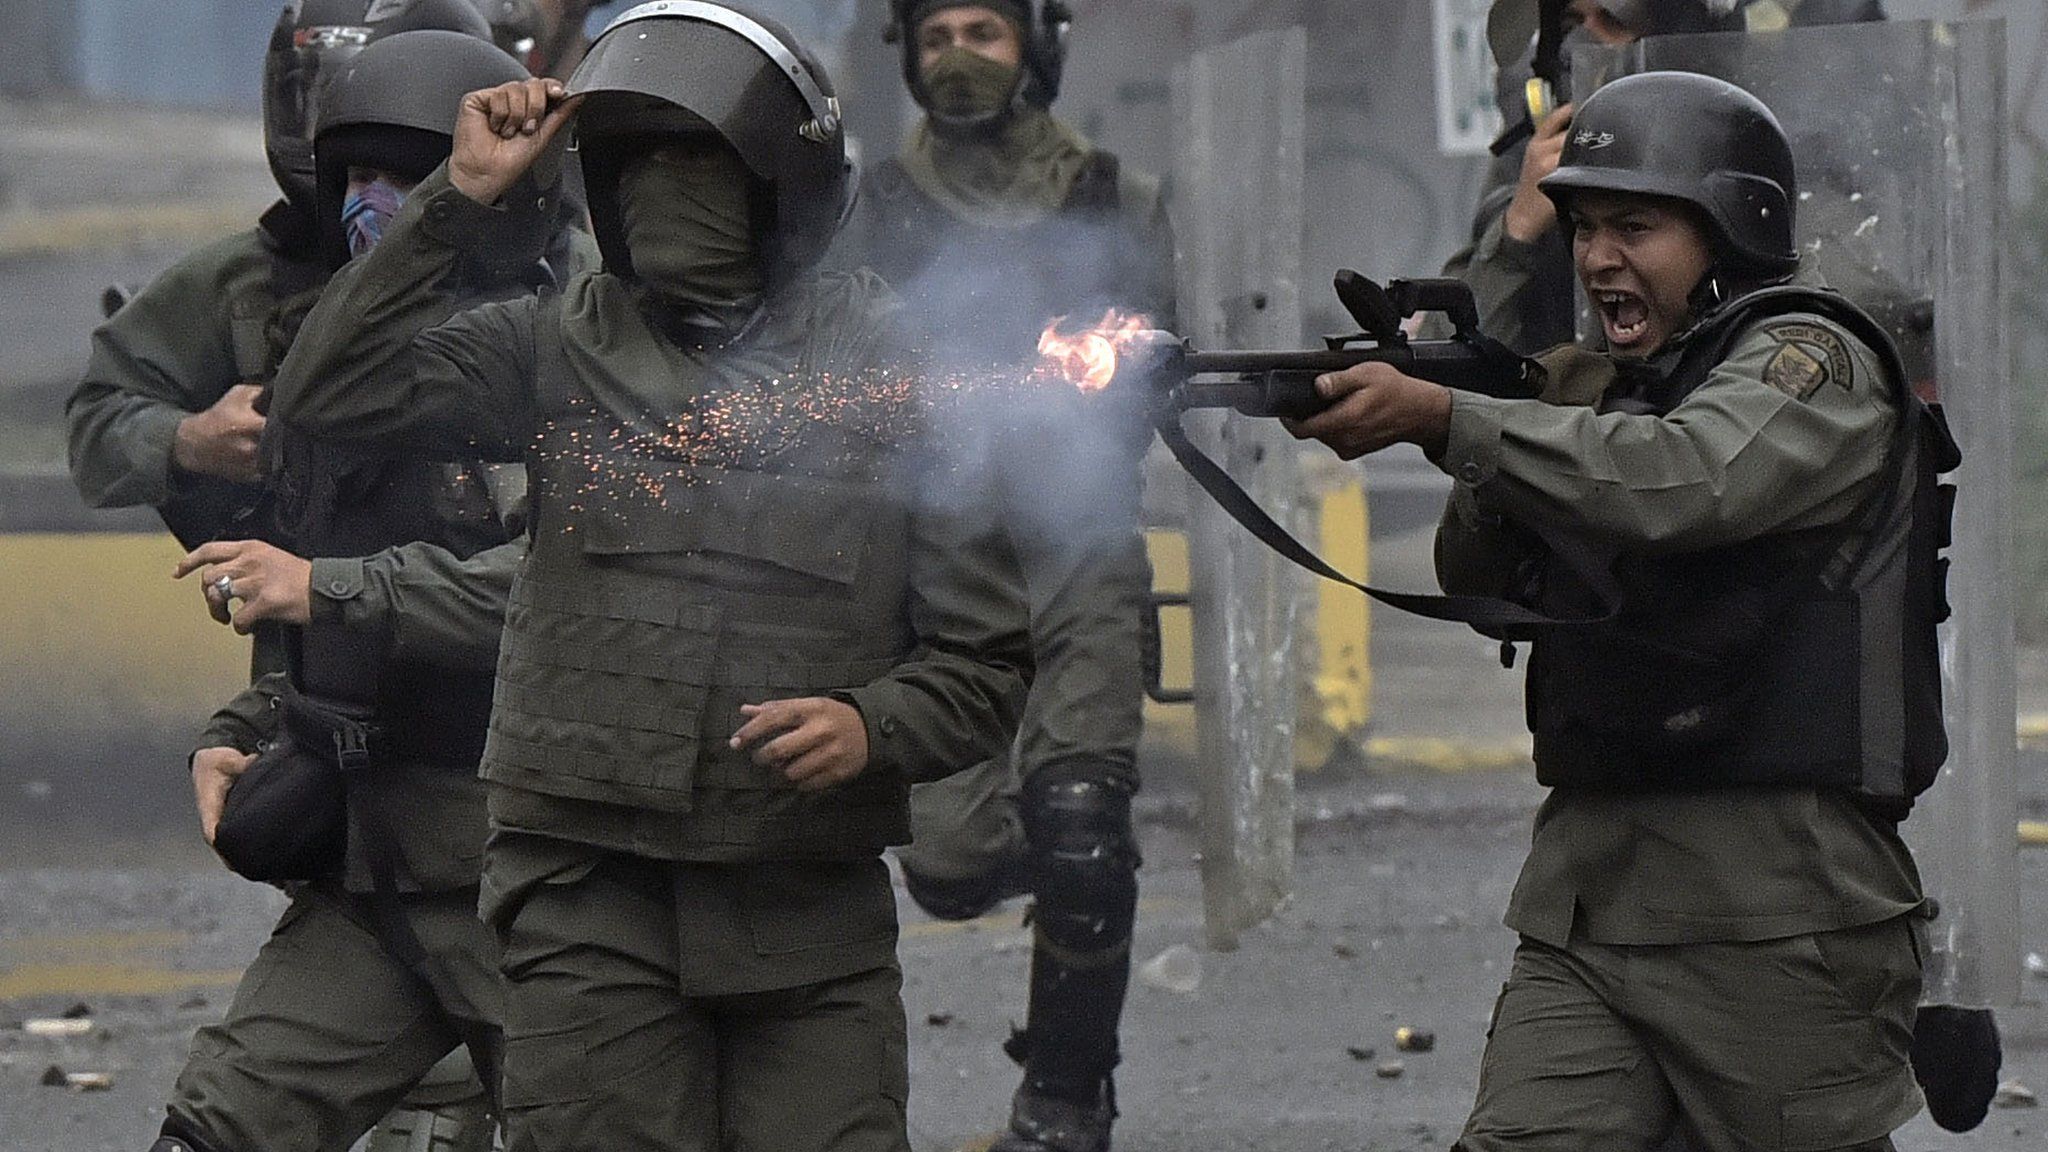 A member of the national guard fires his shotgun at opposition demonstrators during clashes in Caracas on July 28, 2017